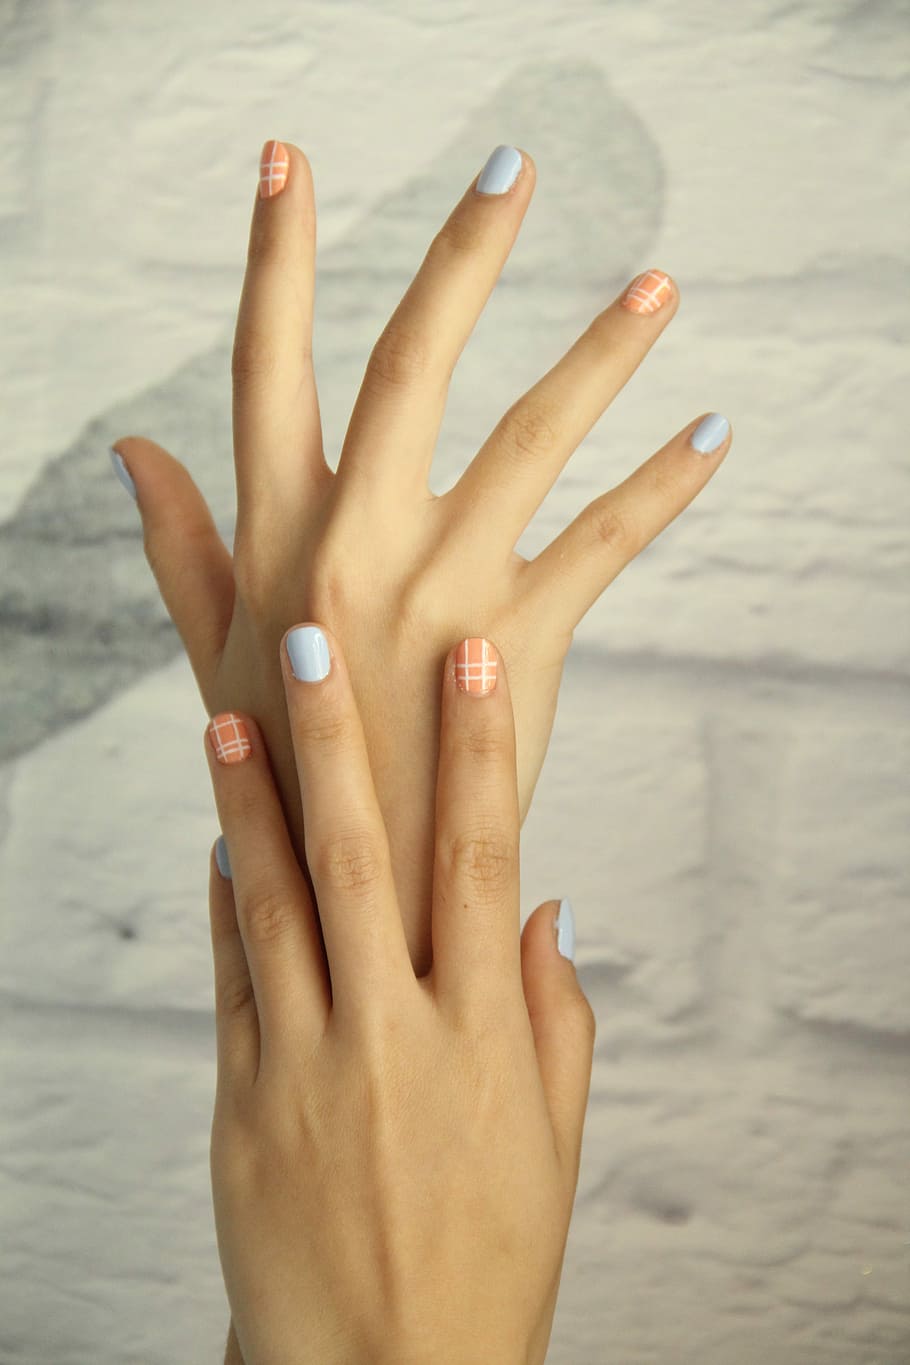 Hands, Nail, Care, human hand, human body part, human finger, beauty product, one woman only, young adult, hand